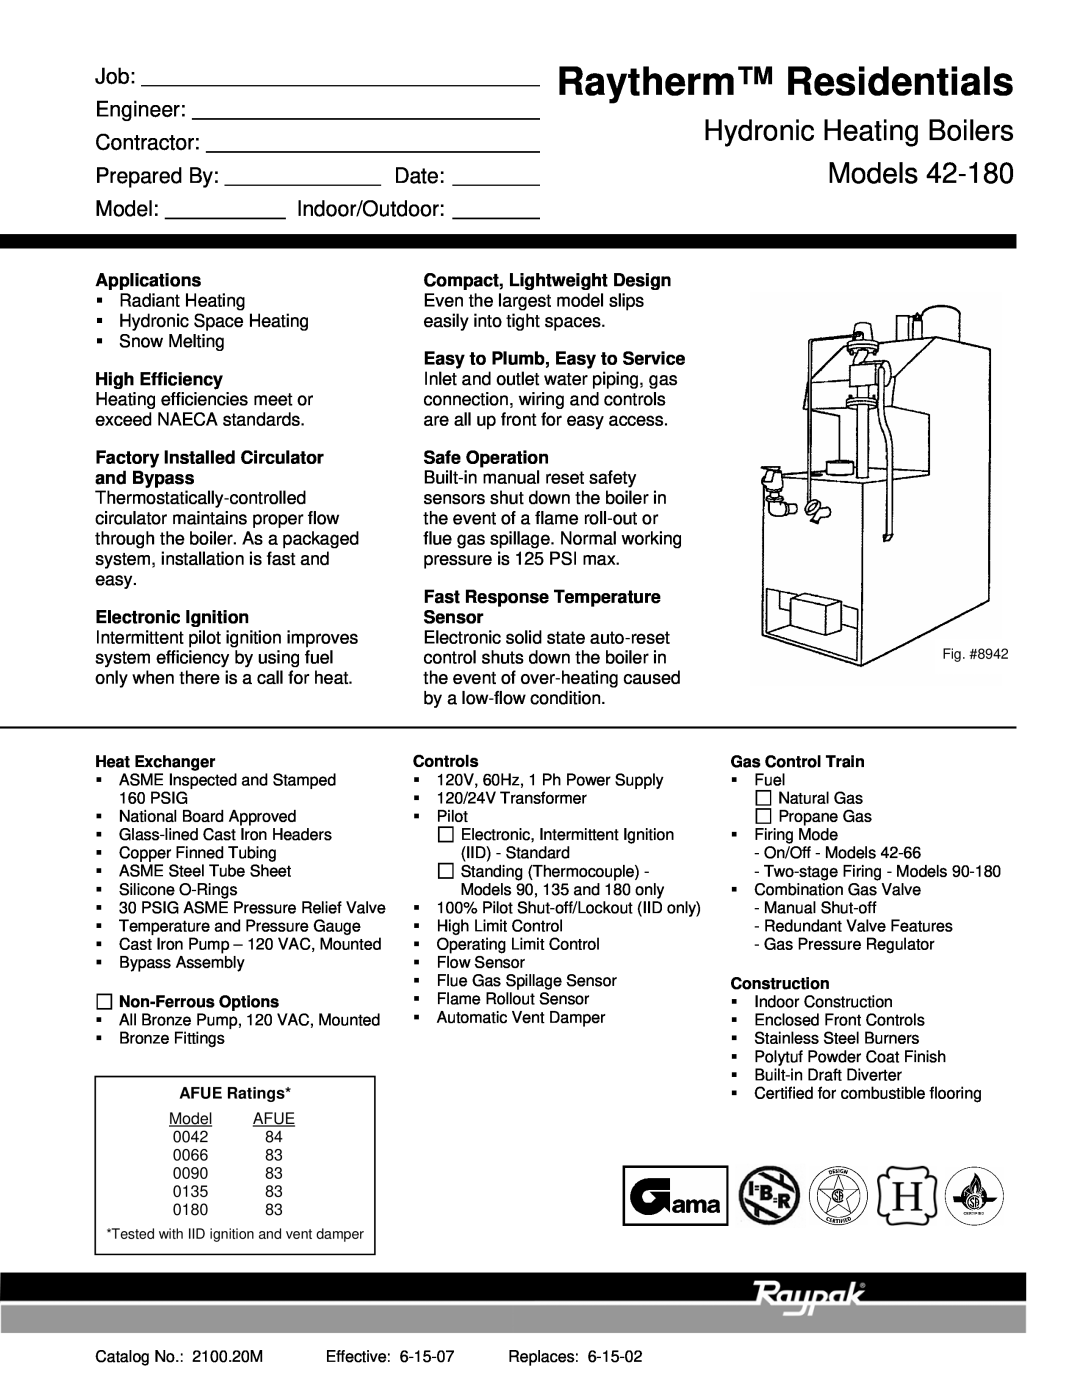 Raypak 42-180 manual Raytherm Residentials, Hydronic Heating Boilers, Models, Job Engineer Contractor, Prepared By, Date 